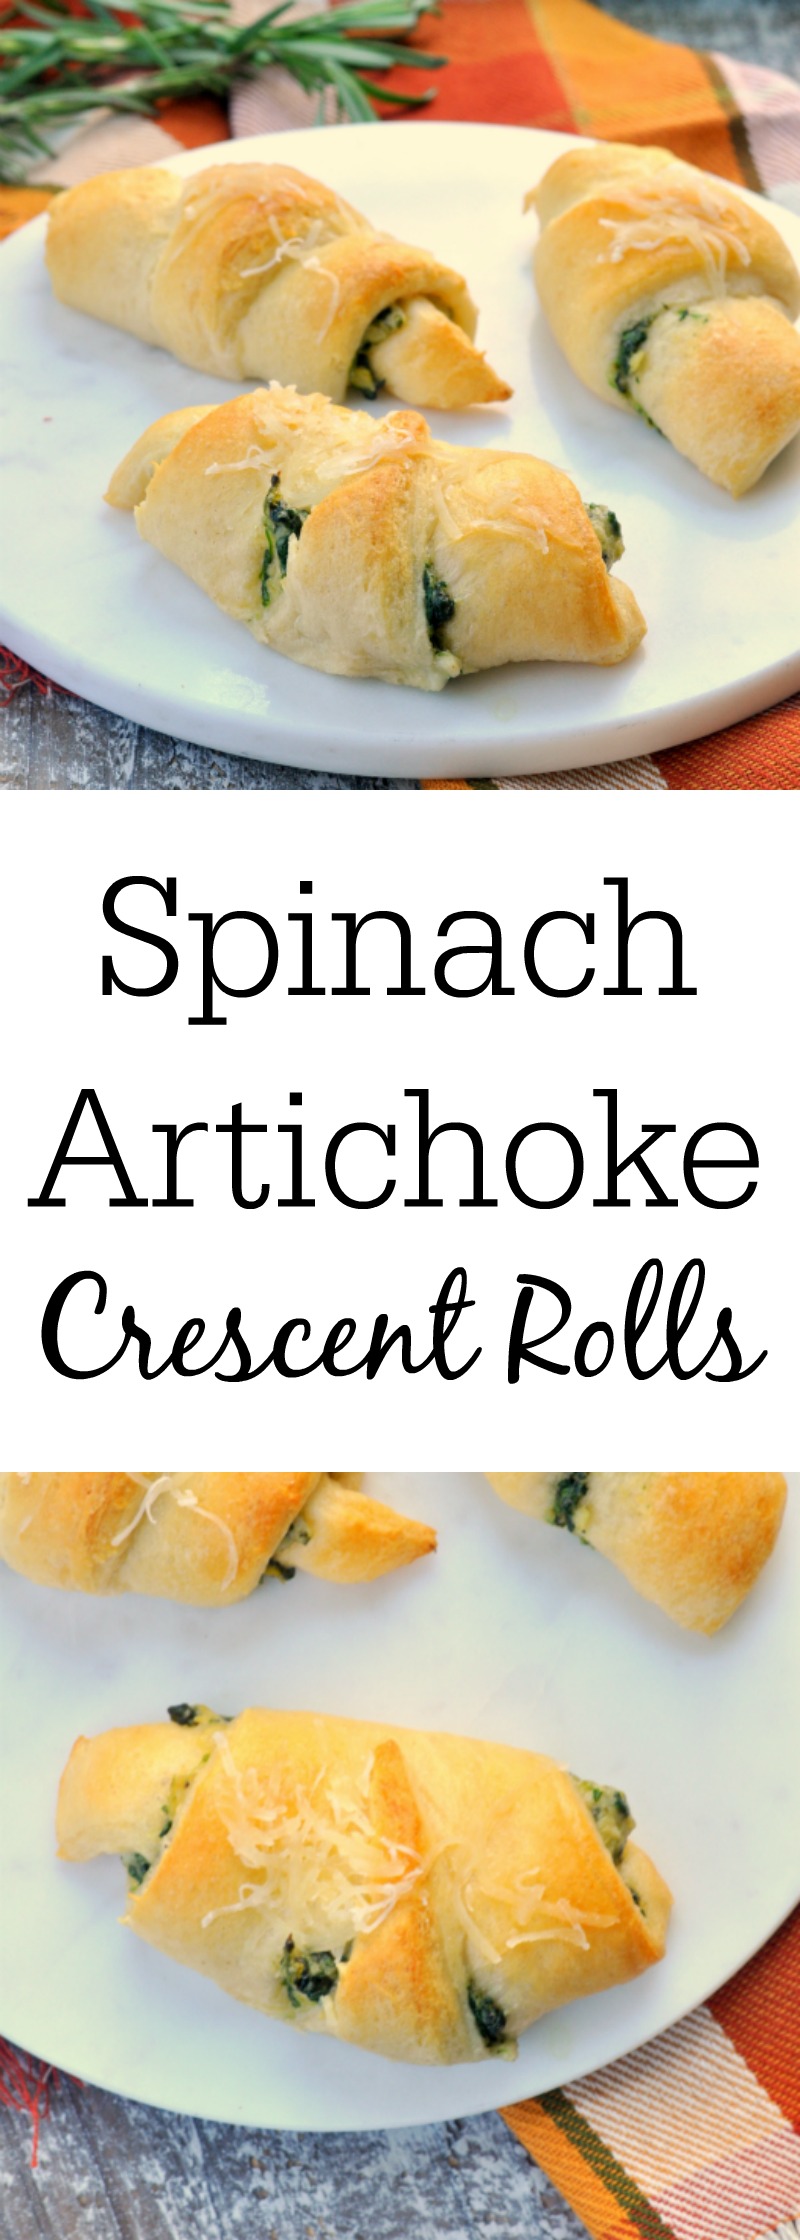 SPINACH CRESCENT ROLL APPETIZERS - A Mom's Impression